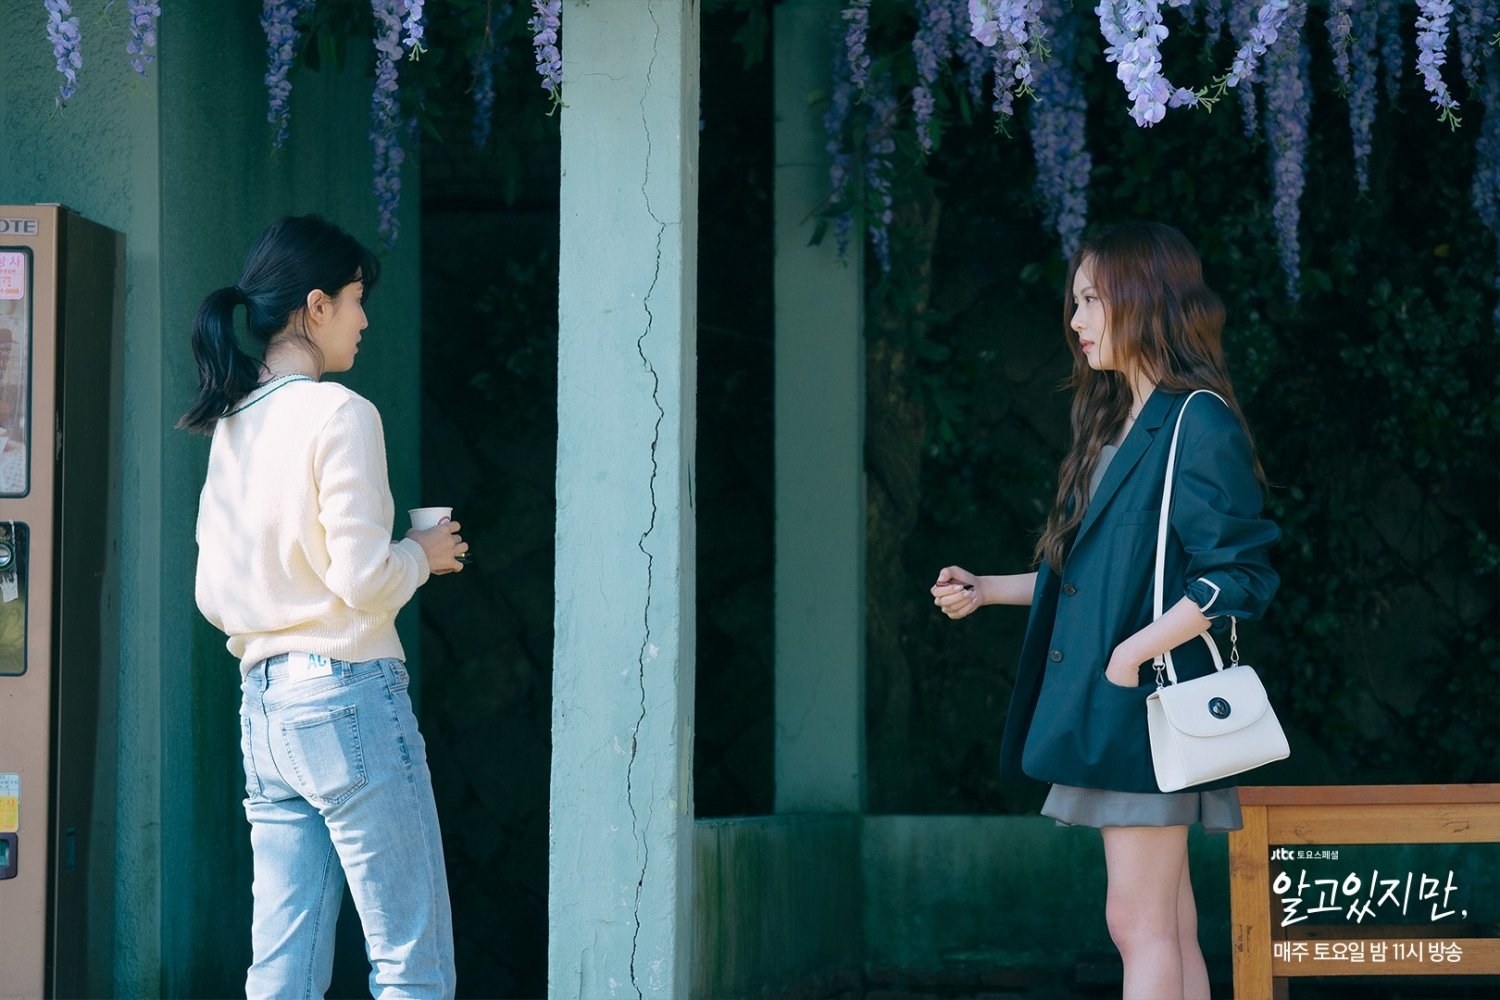 Na-bi outside holding a coffee cup talking to Seol-a